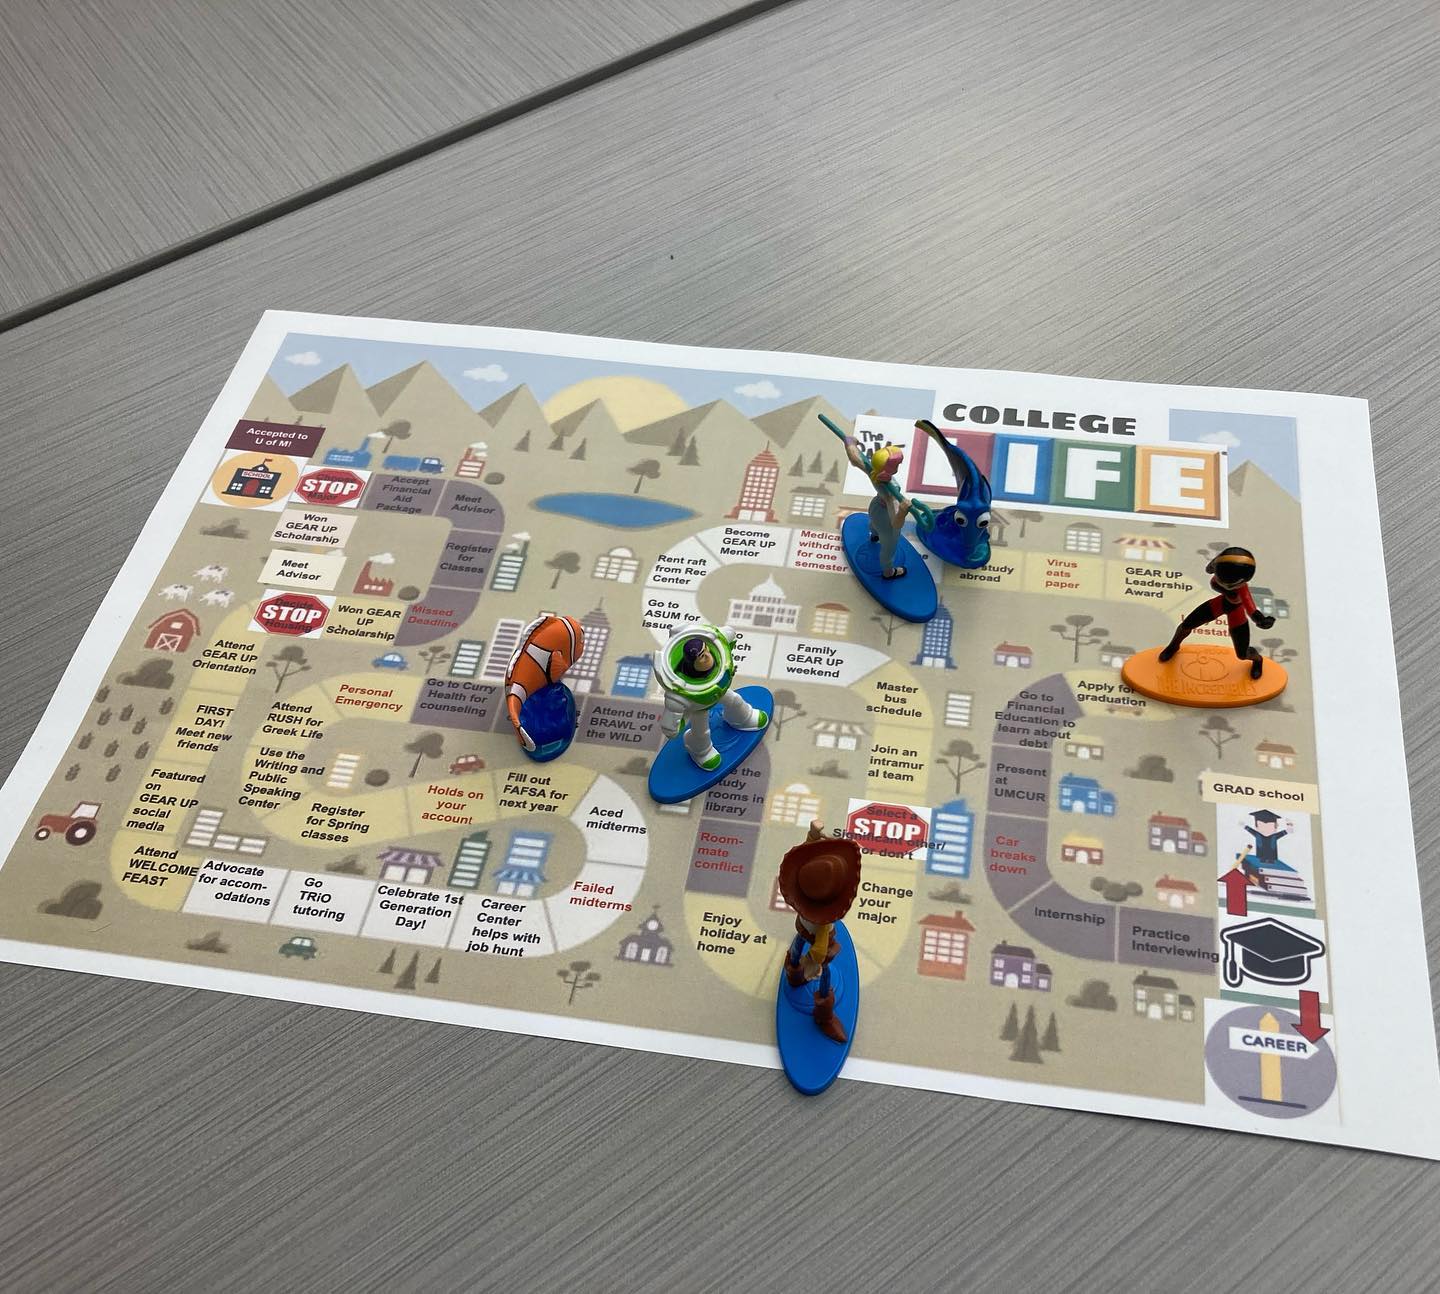 Game board of College LIFE event with game pieces.